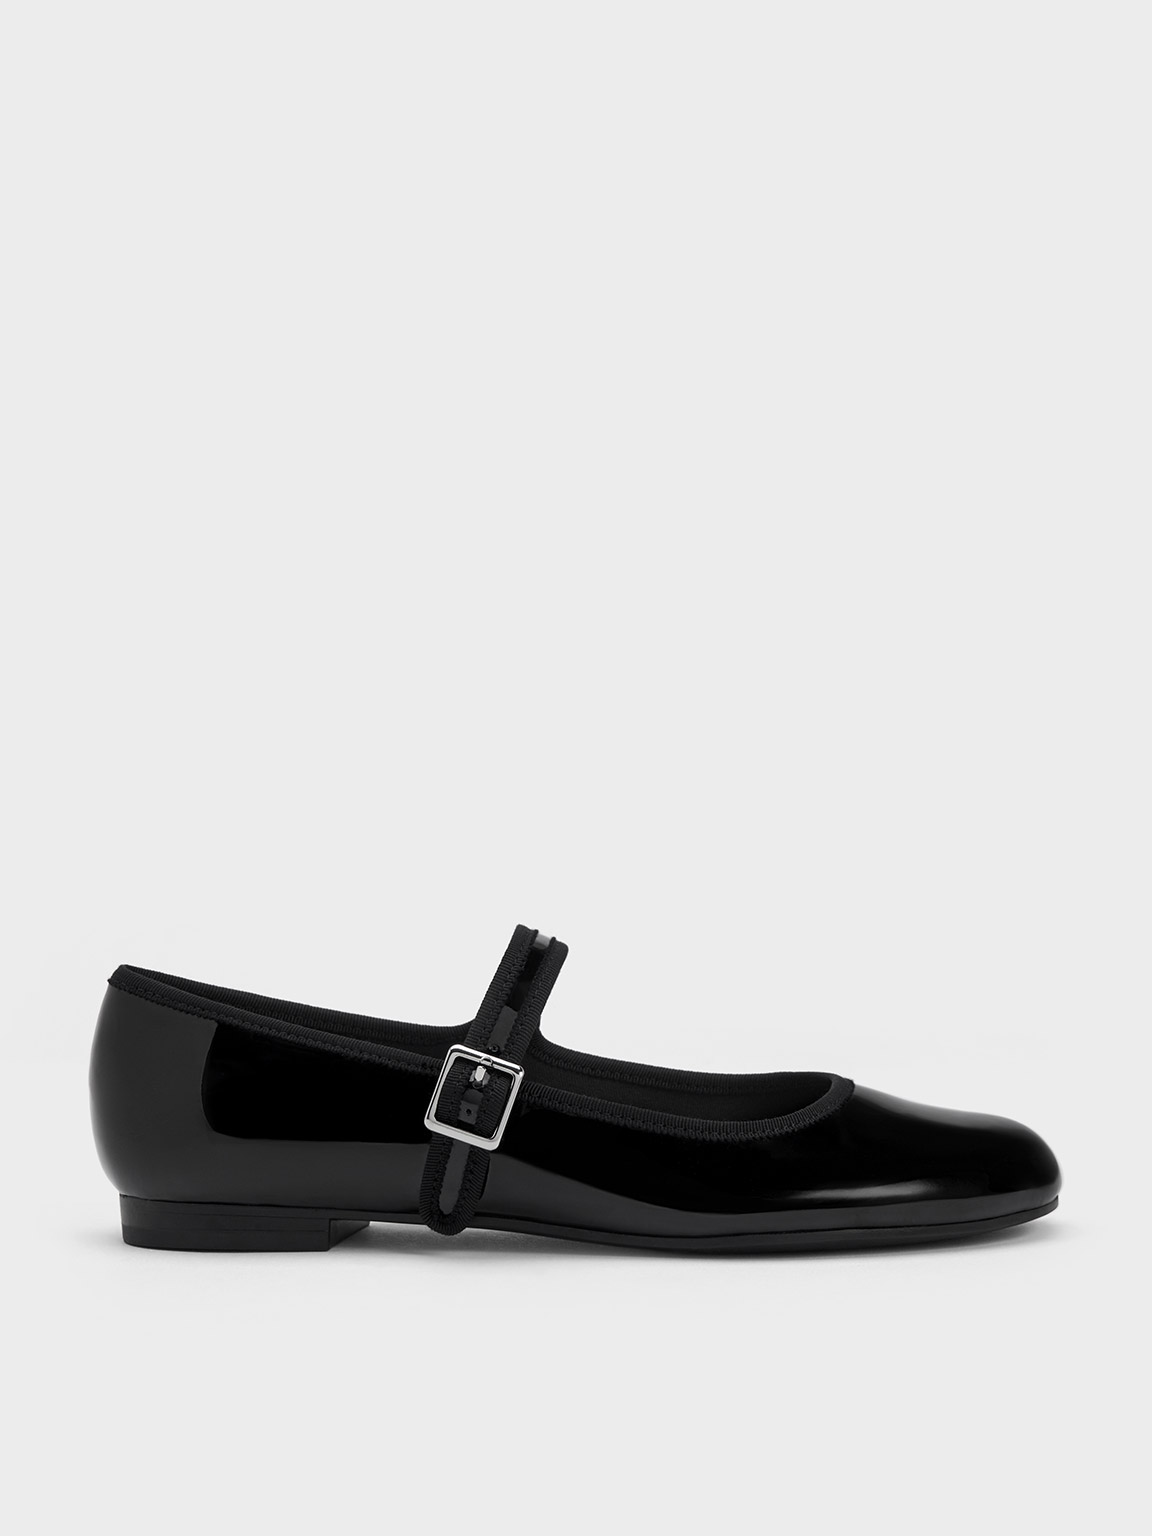 Charles & Keith Patent Buckled Mary Jane Flats In Black